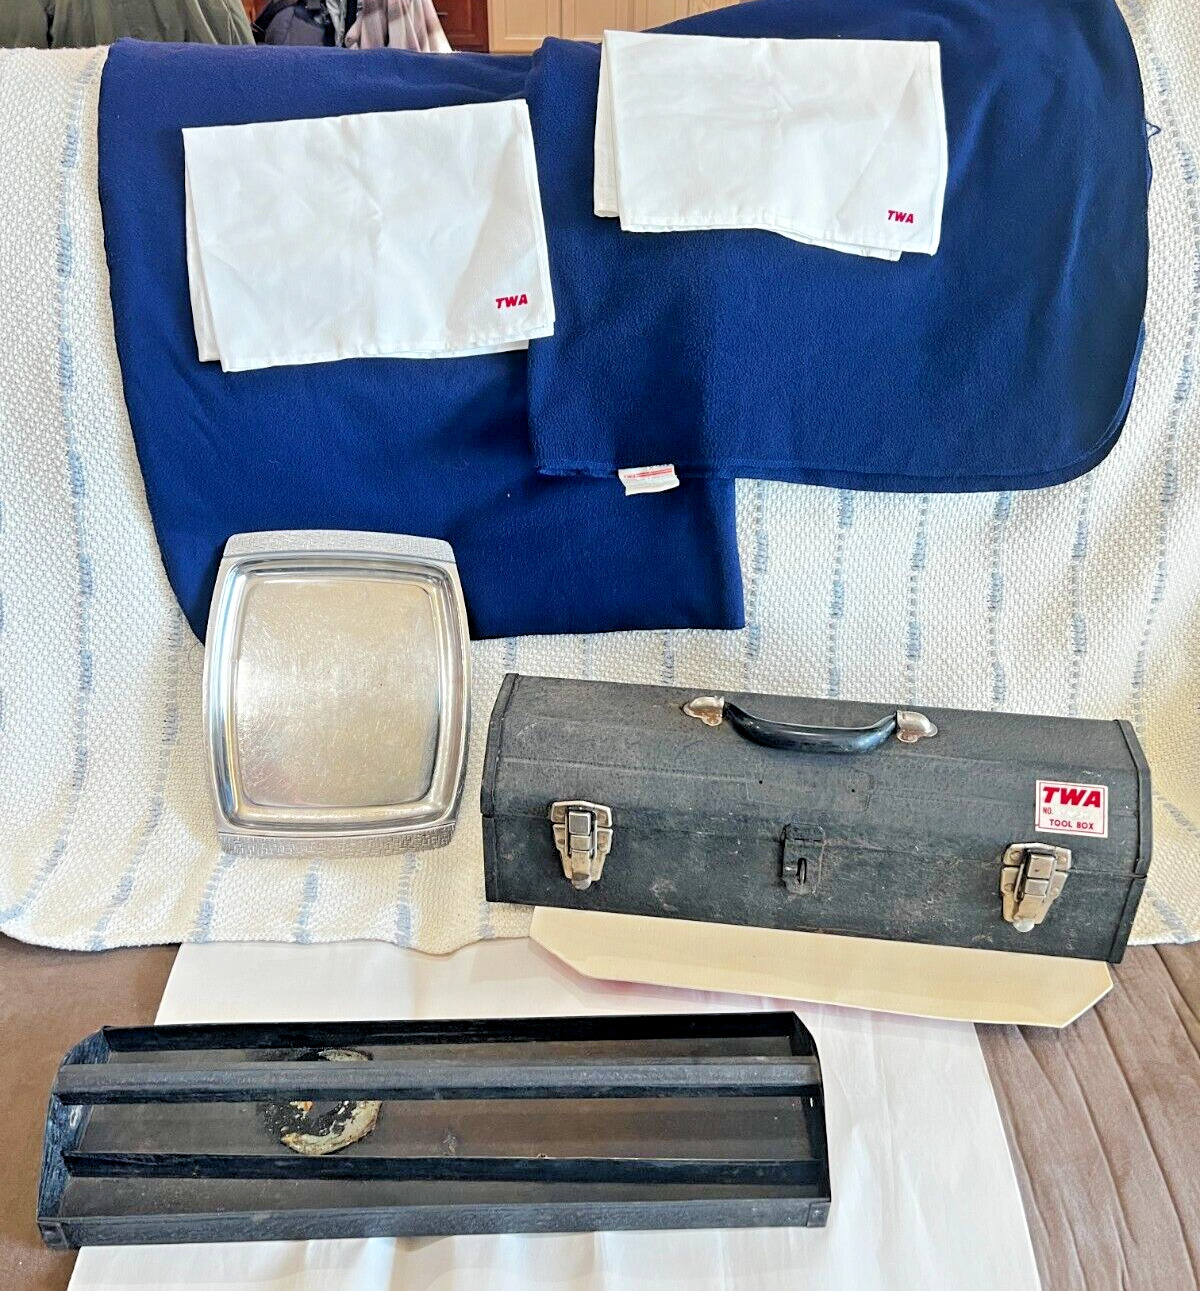 VTG TWA Trans World Airlines Toolbox, Cabin Blankets, Napkins and Serving Tray